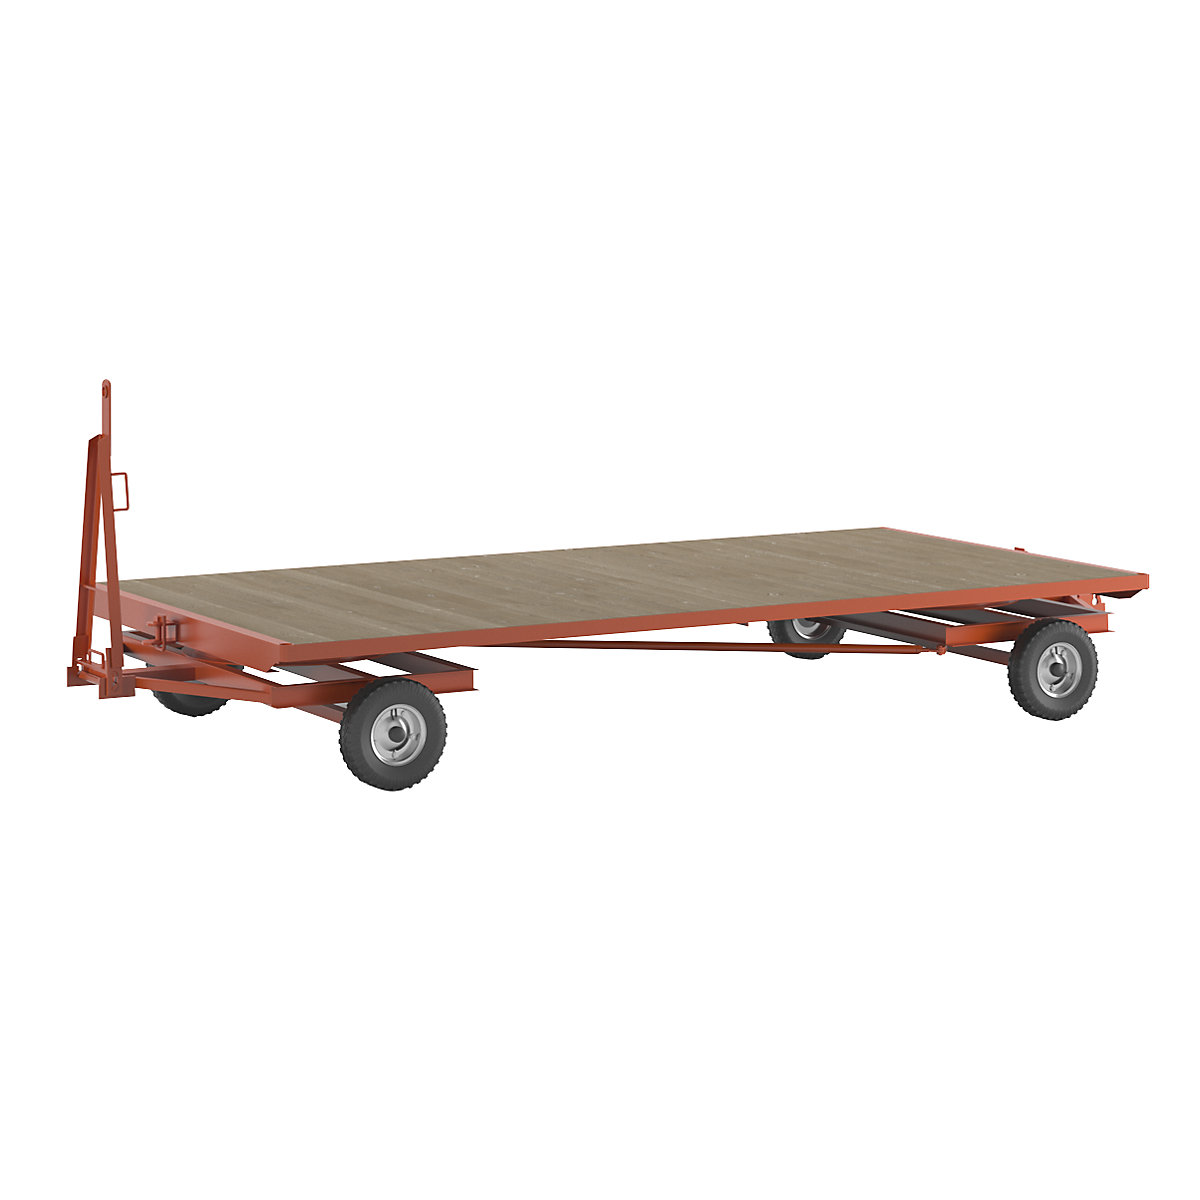 Trailer, 4-wheel double turntable steering, max. load 3 t, platform 4.0 x 2.0 m, pneumatic tyres-5